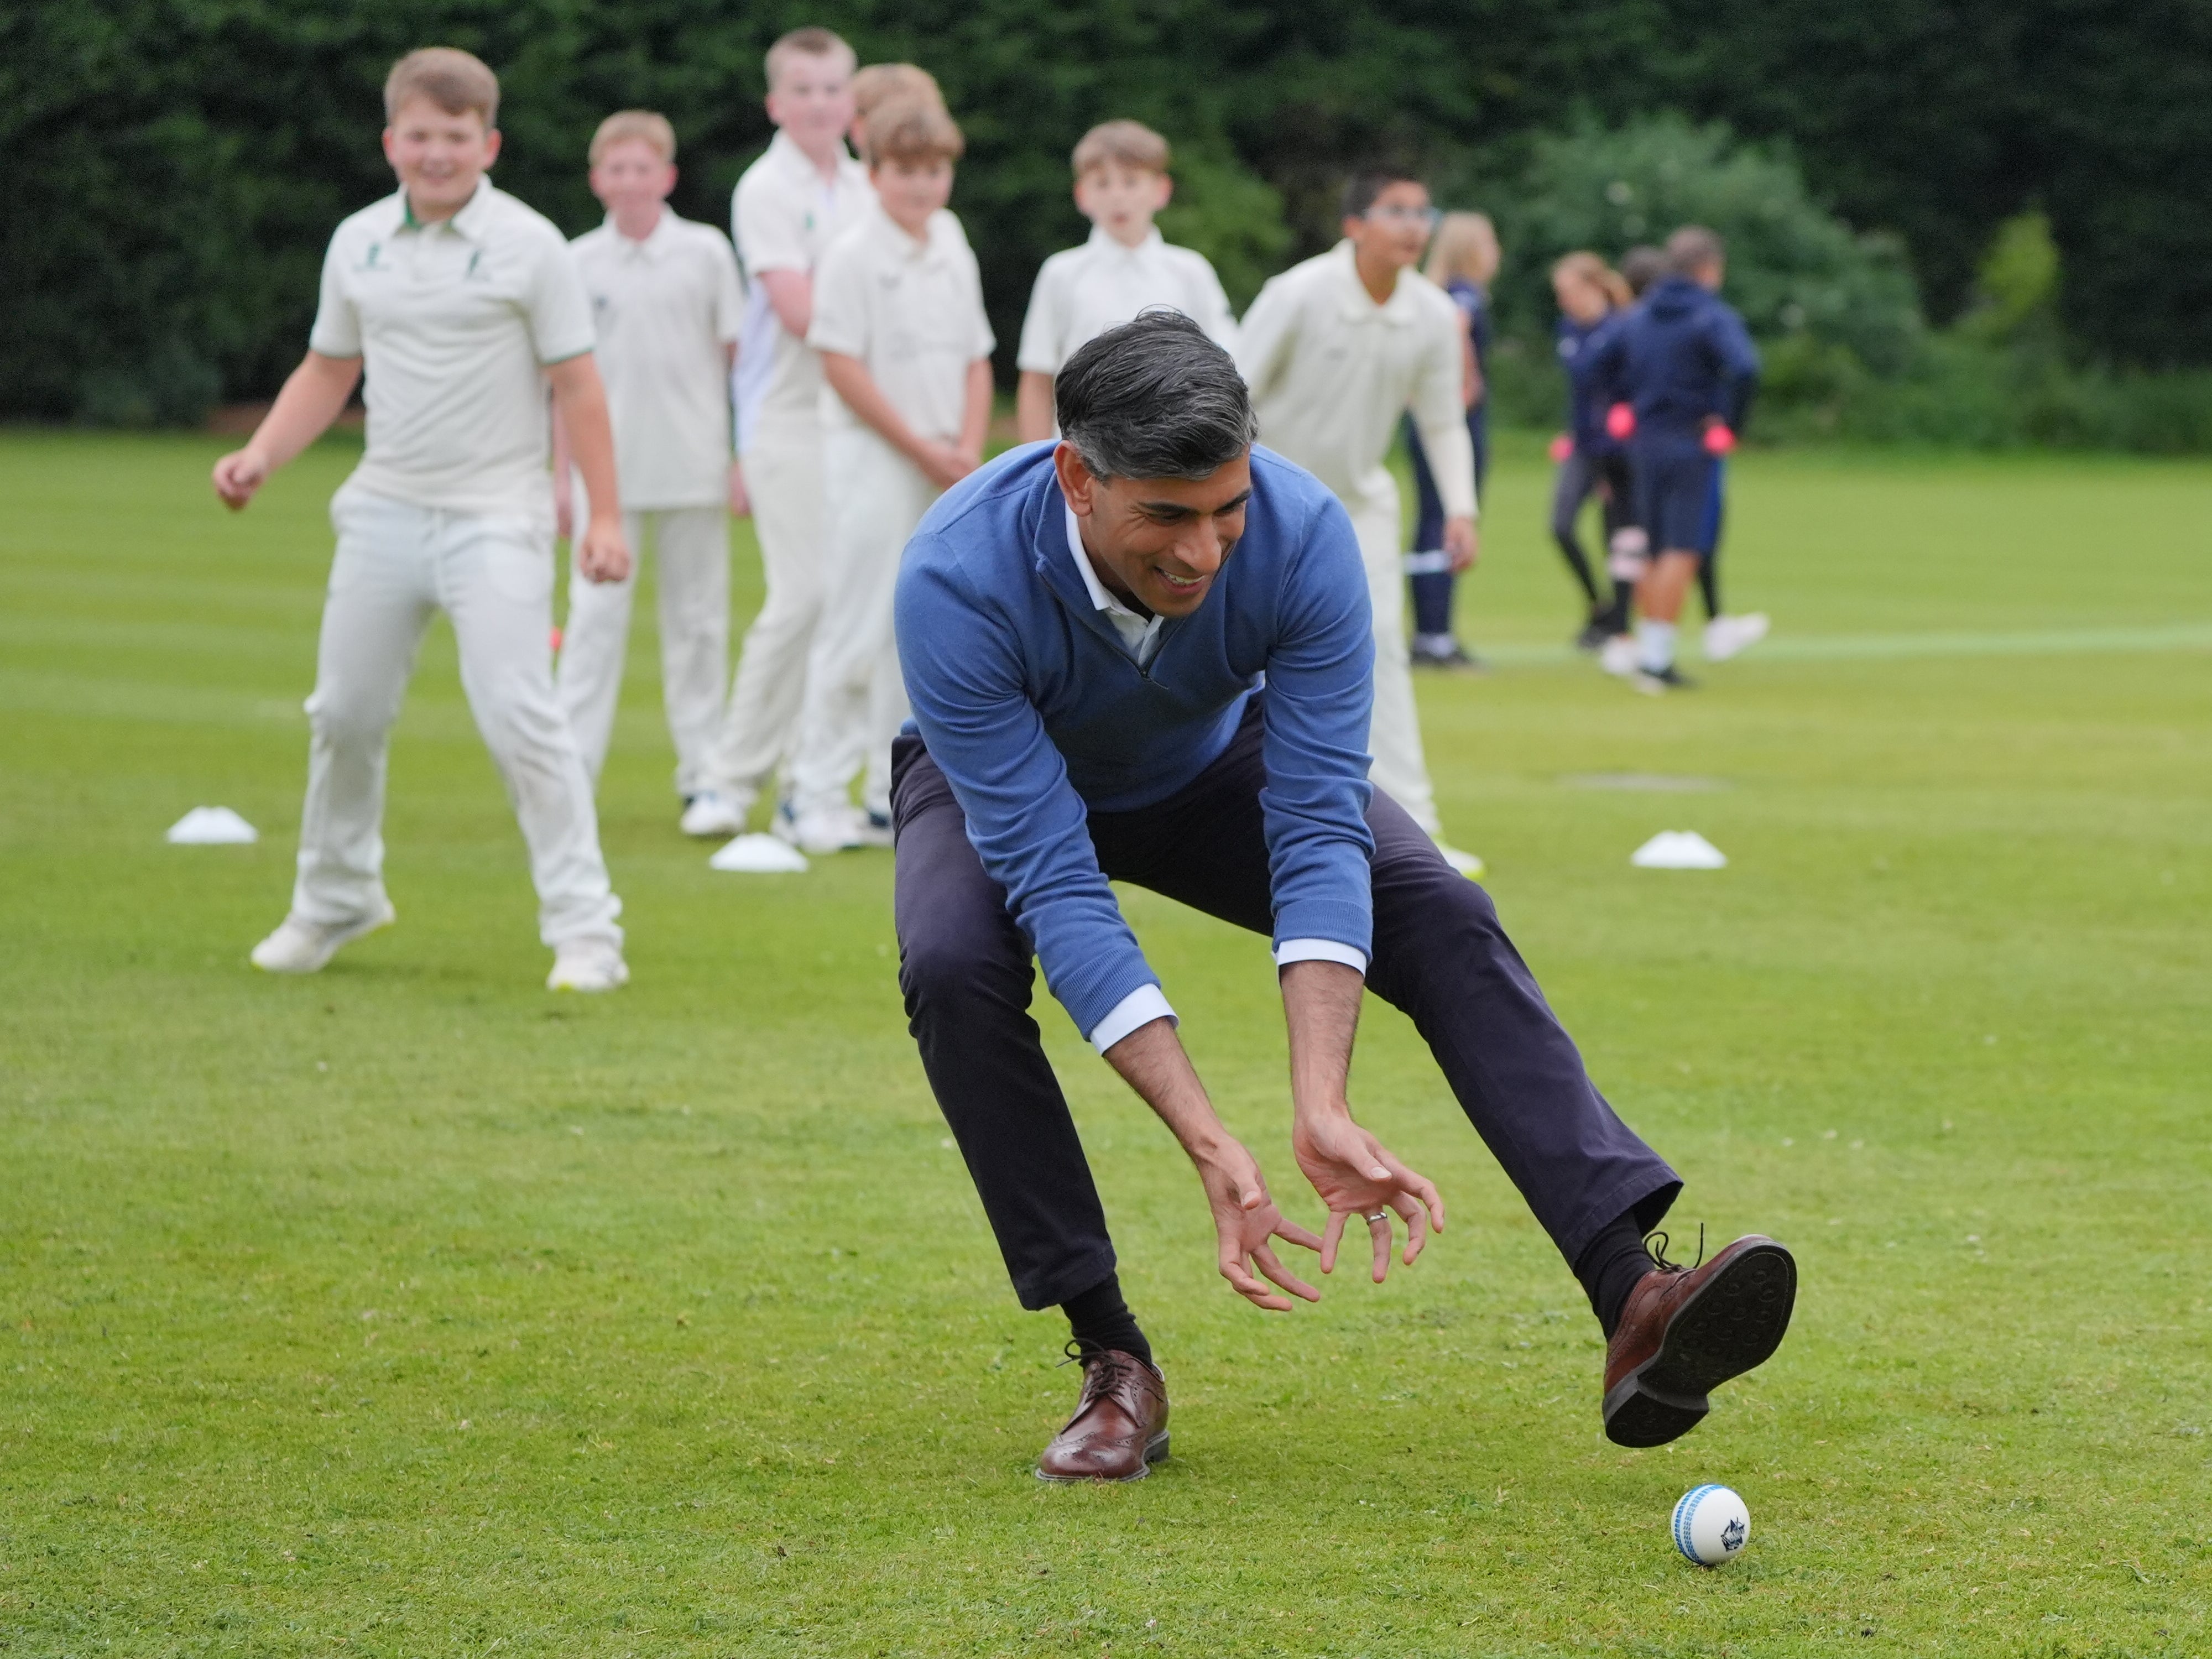 Rishi Sunak was hoping he wouldn’t have to field too many difficult questions during a visit to Nuneaton Cricket Club (Jonathan Brady/PA)